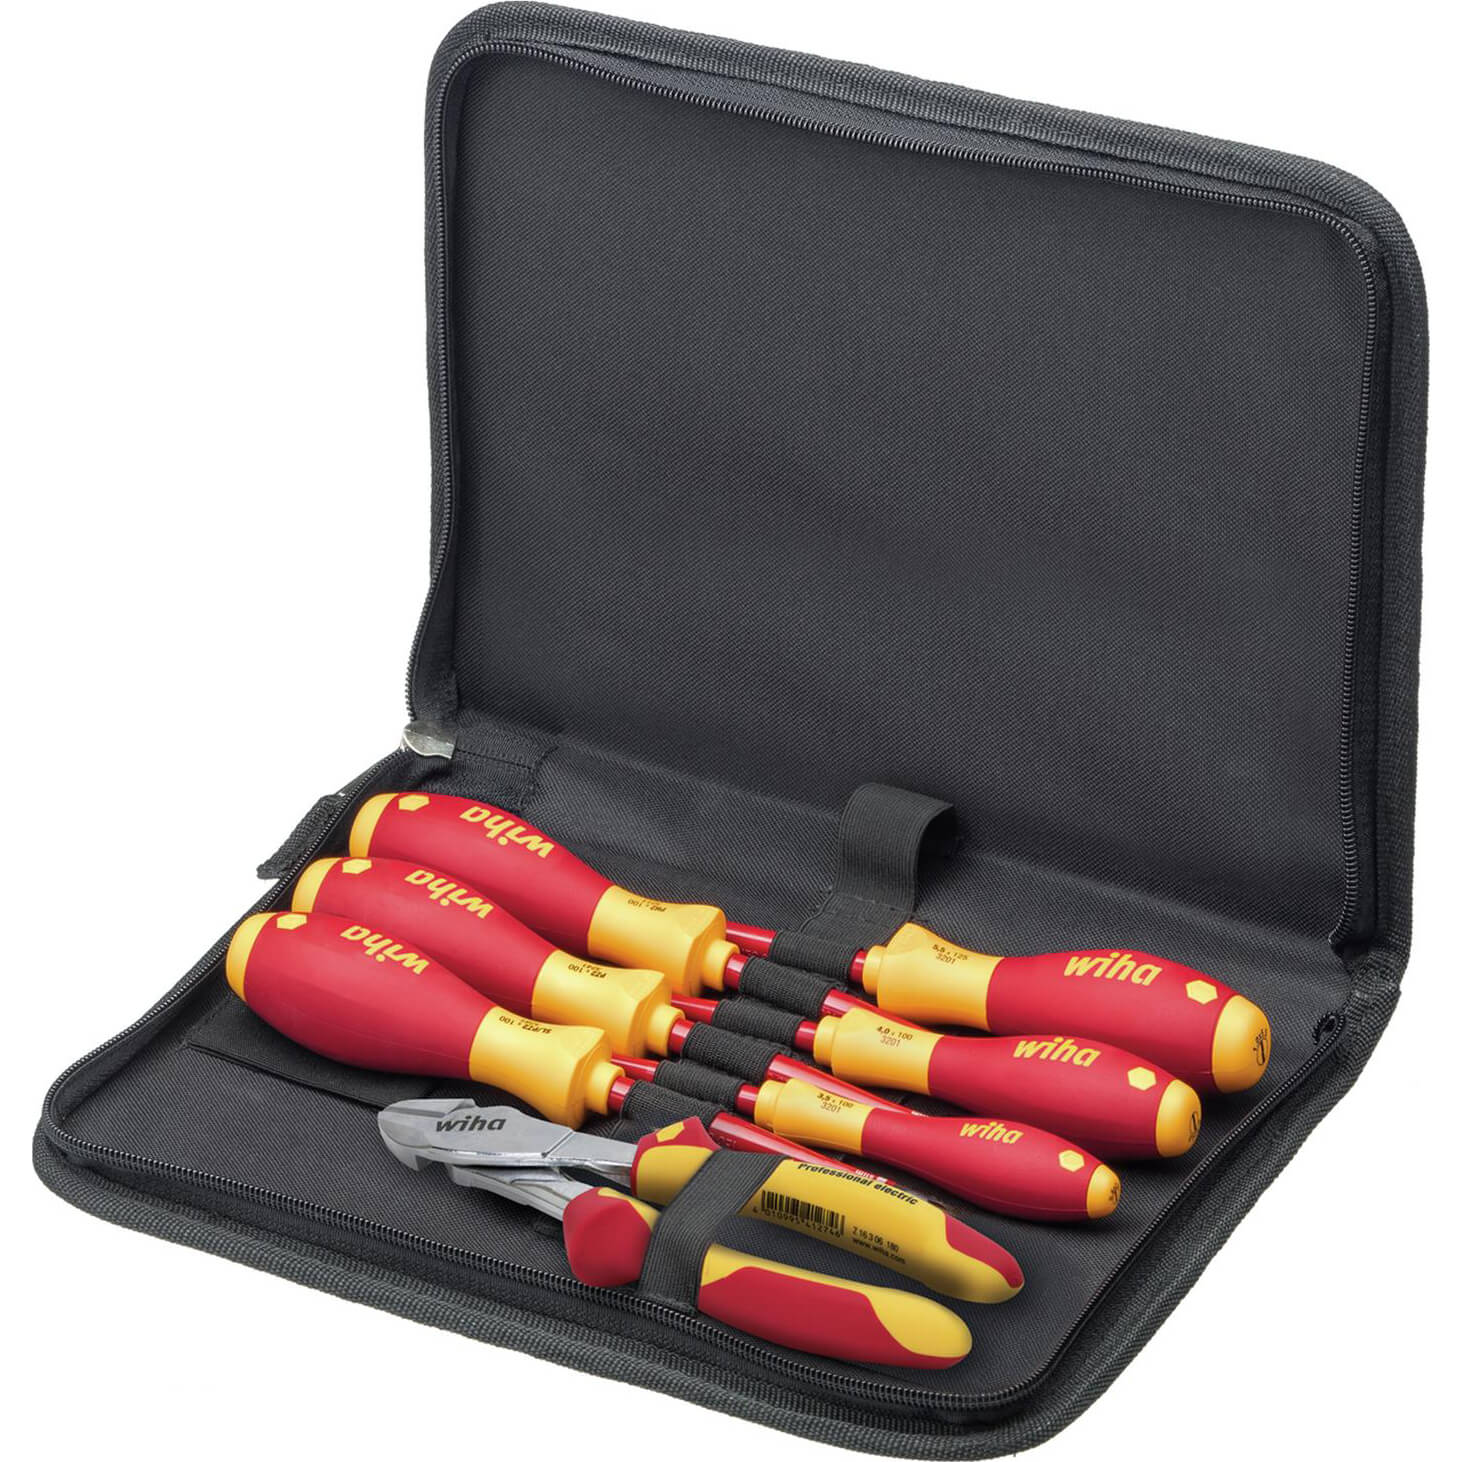 Image of Wiha 7 piece VDE Insulated Screwdriver and Side Cutters Tool Kit